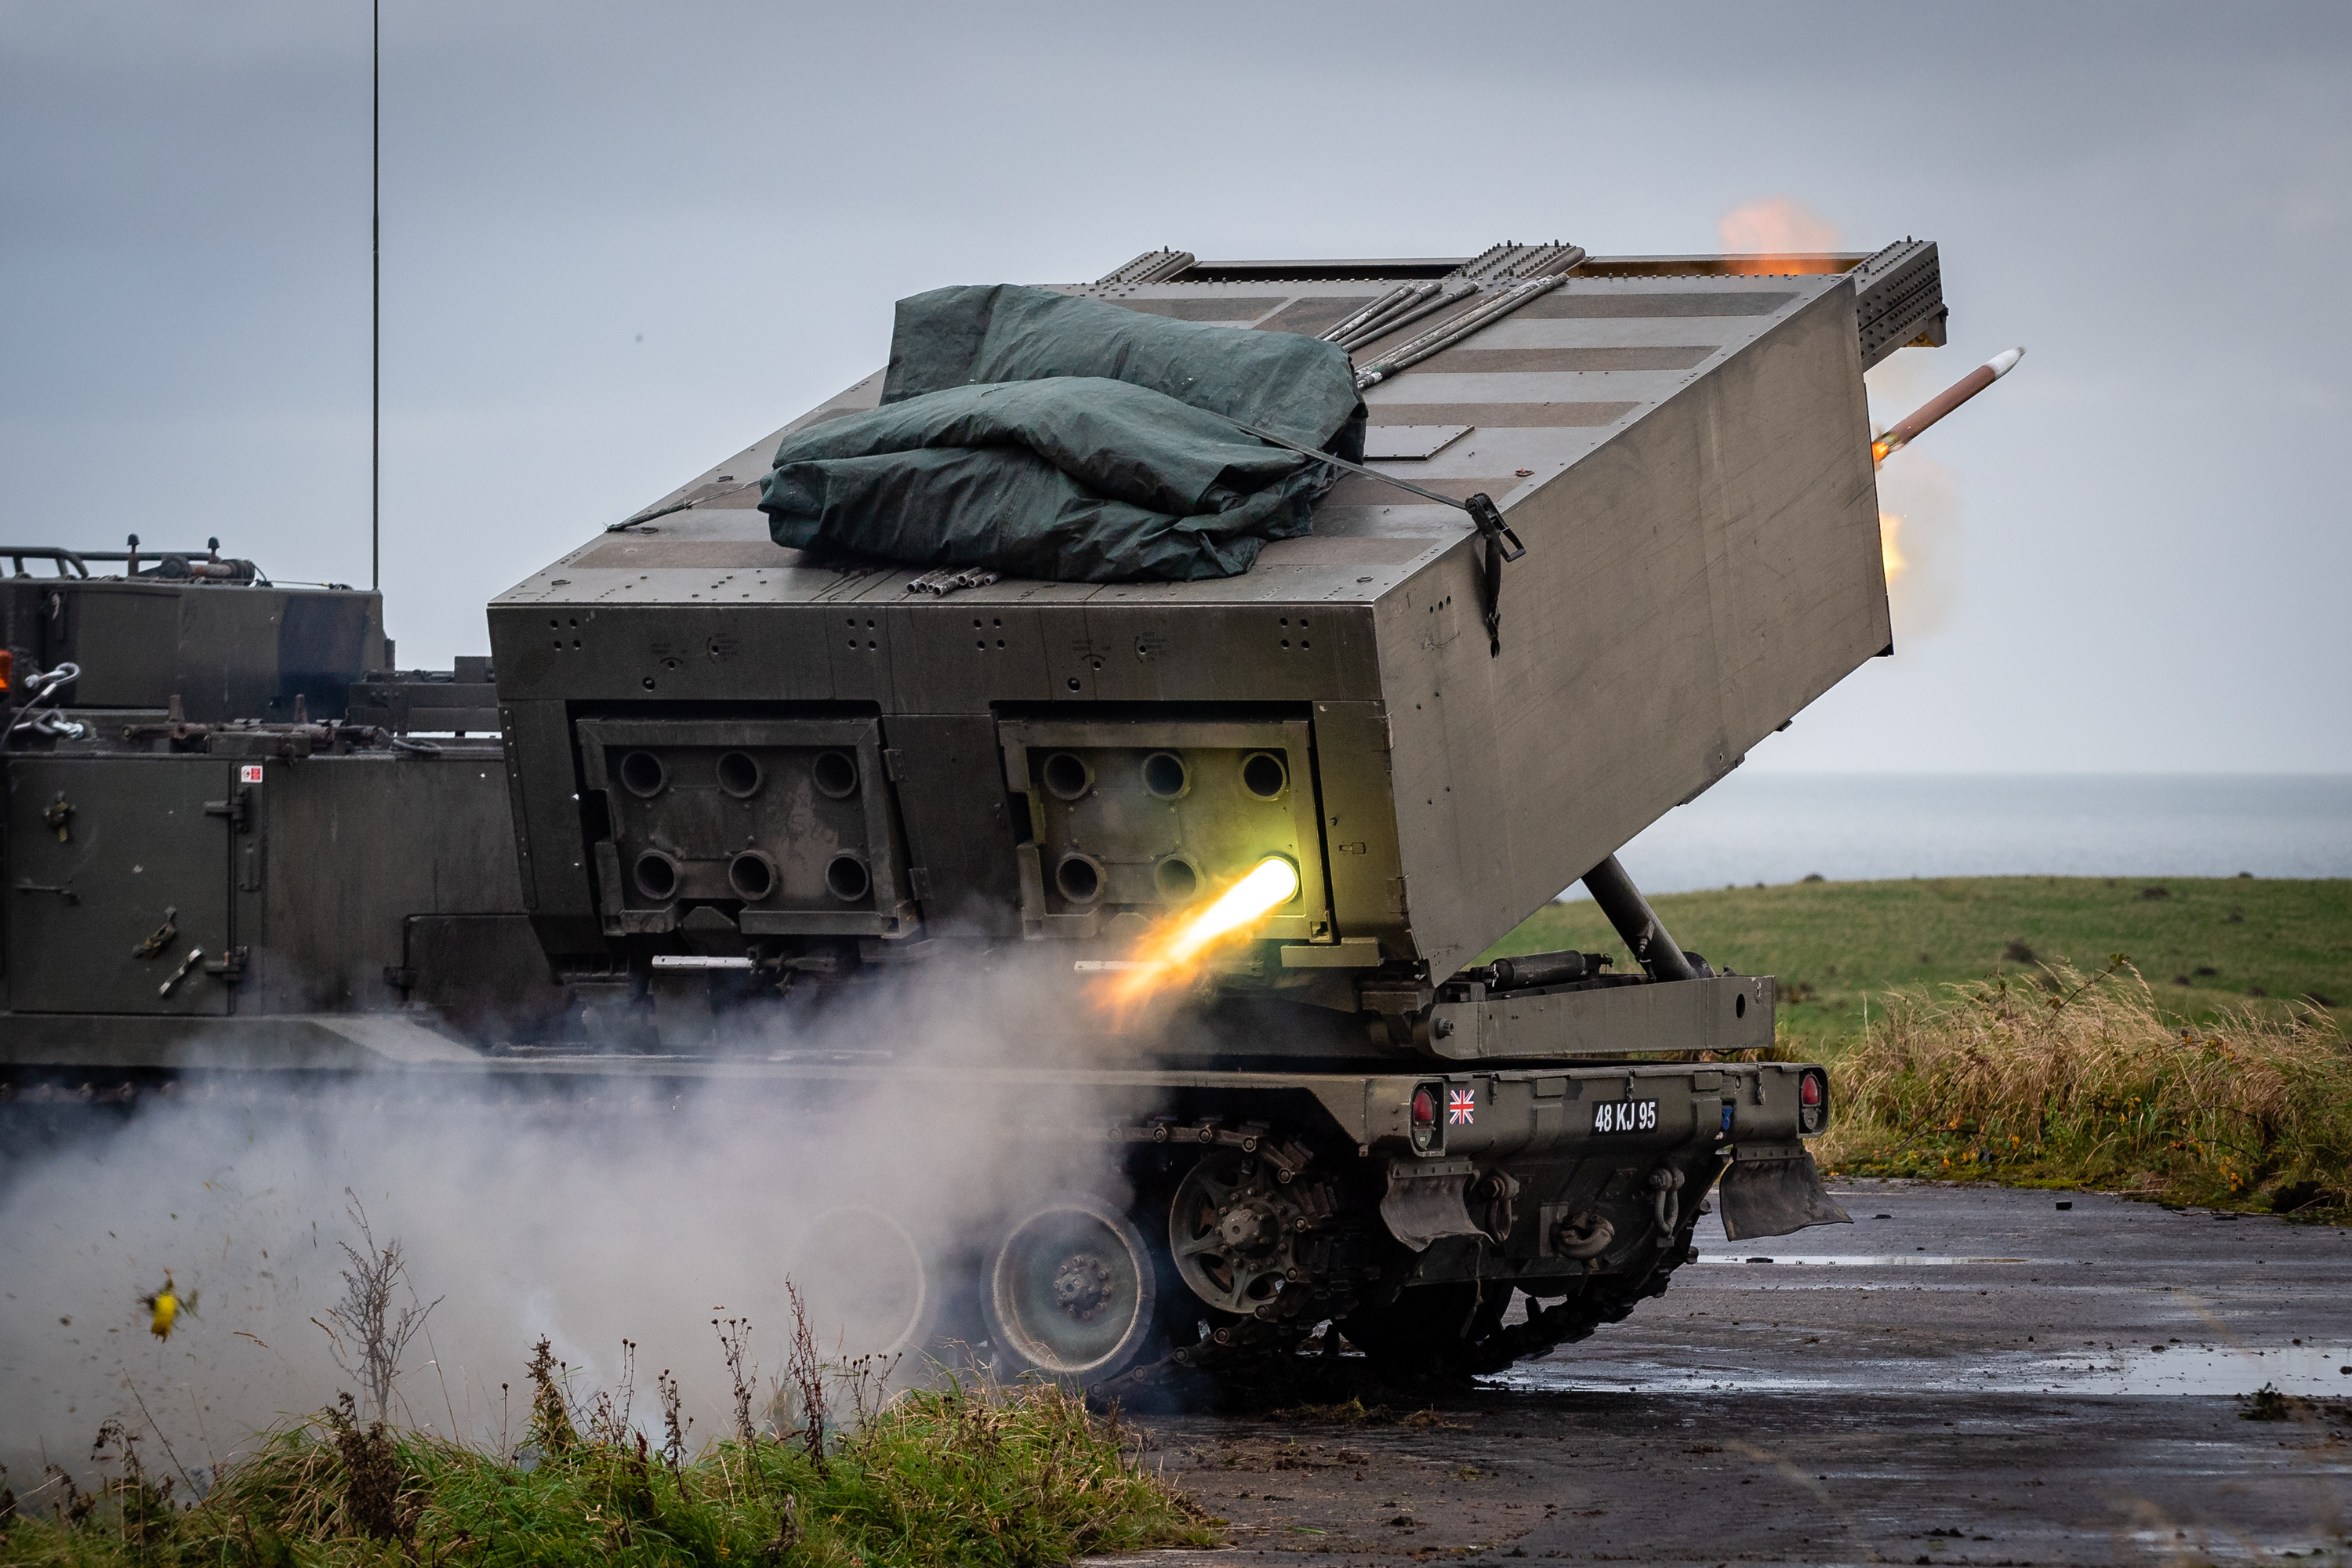 British Army to Upgrade M270B1 Multiple Launch Rocket Systems (MLRS)